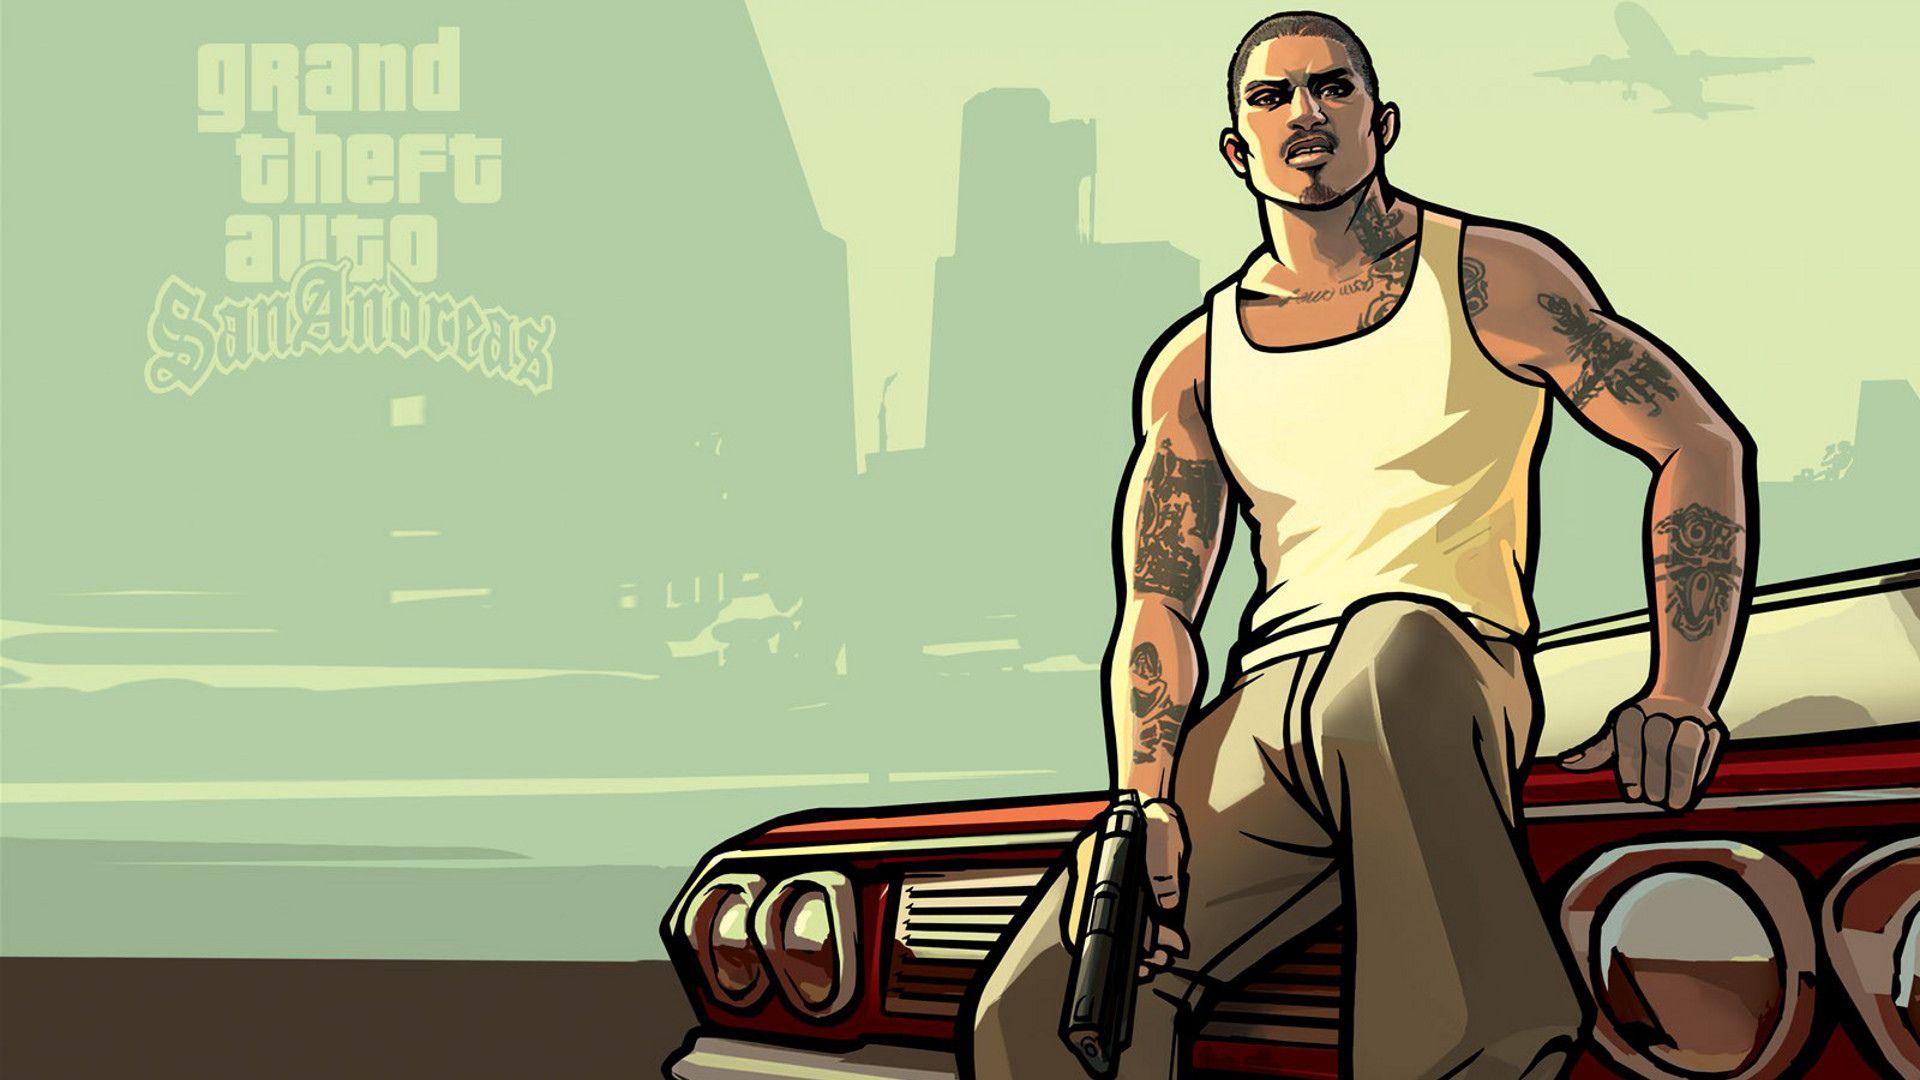 Grand Theft Auto San Andreas 2K Wallpapers and Backgrounds